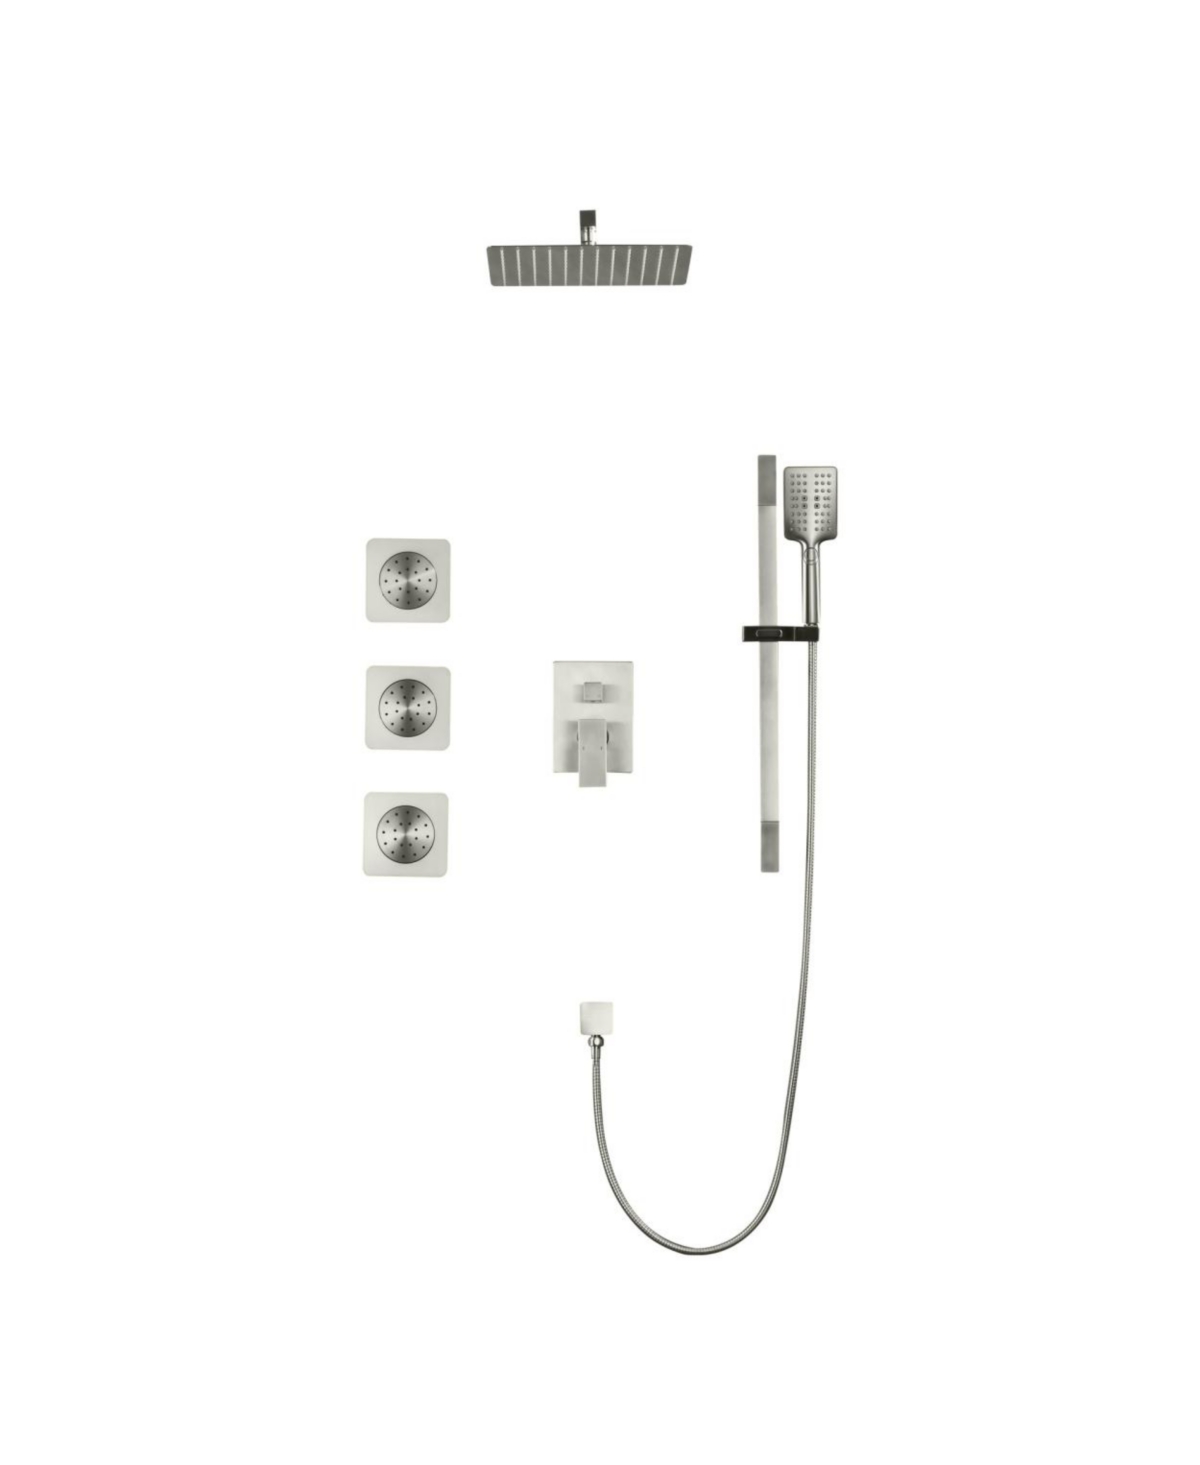 Complete Shower System with Multiple Components - Silver